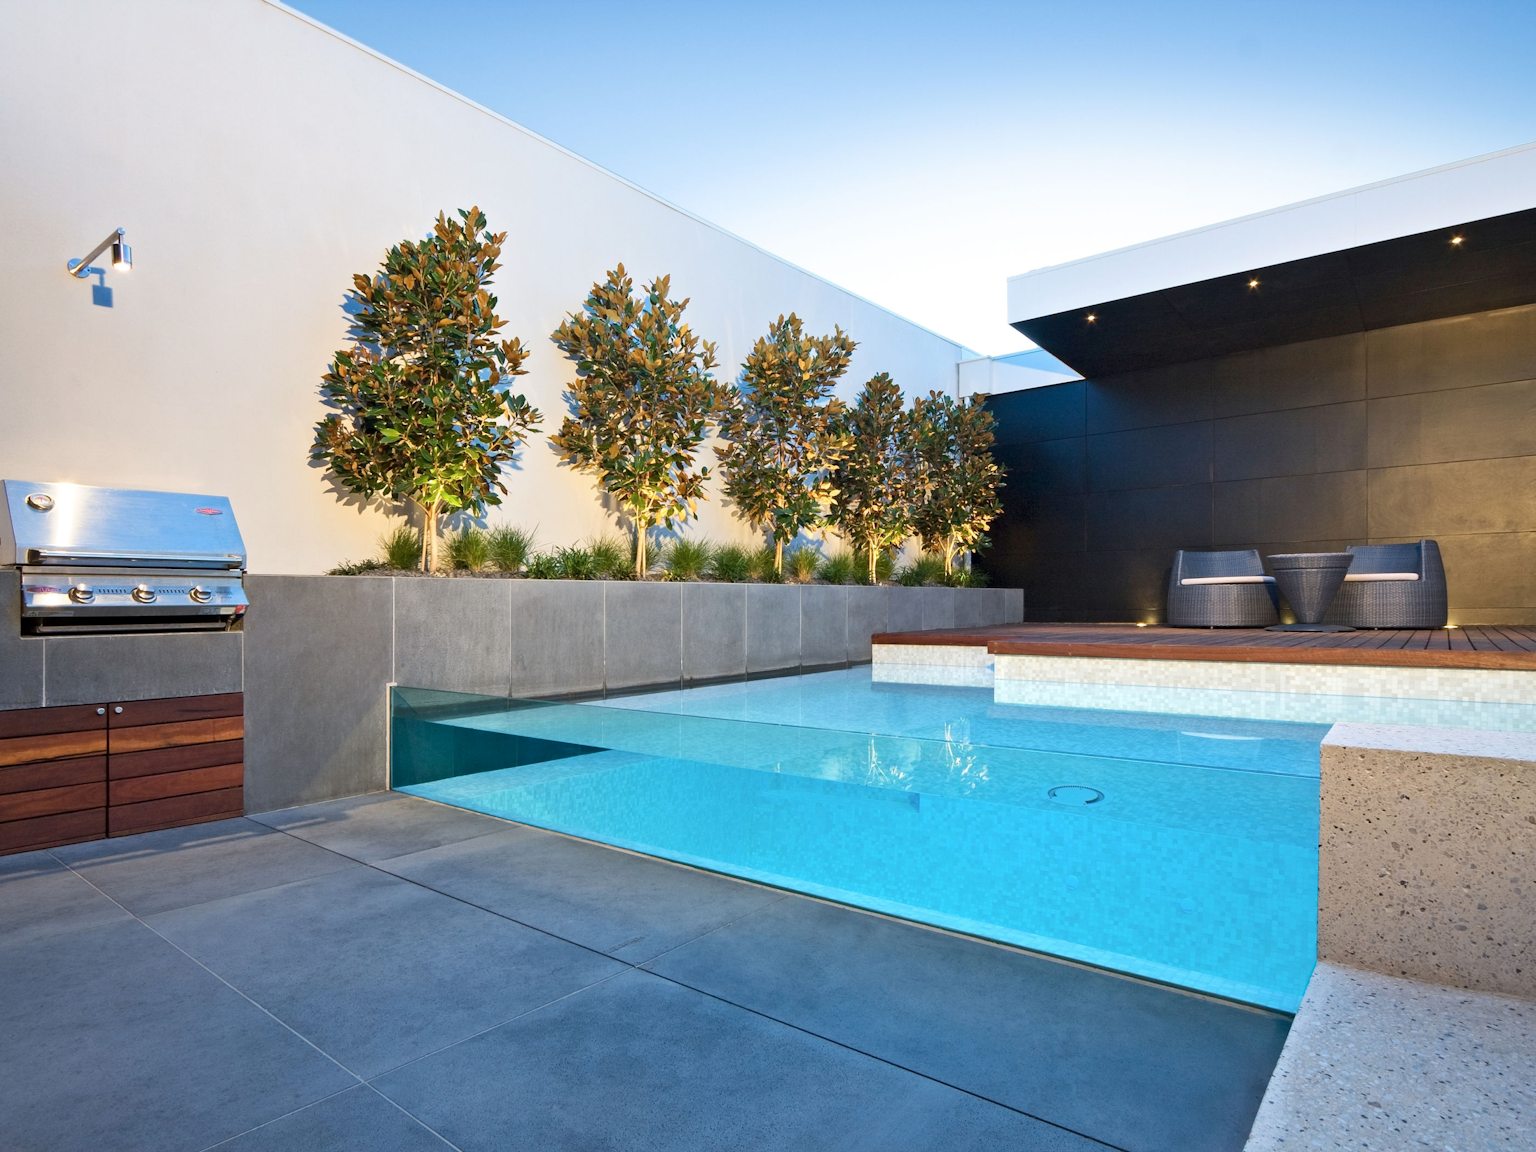 Large format bluestone pavers used as flooring and walling in pool area 